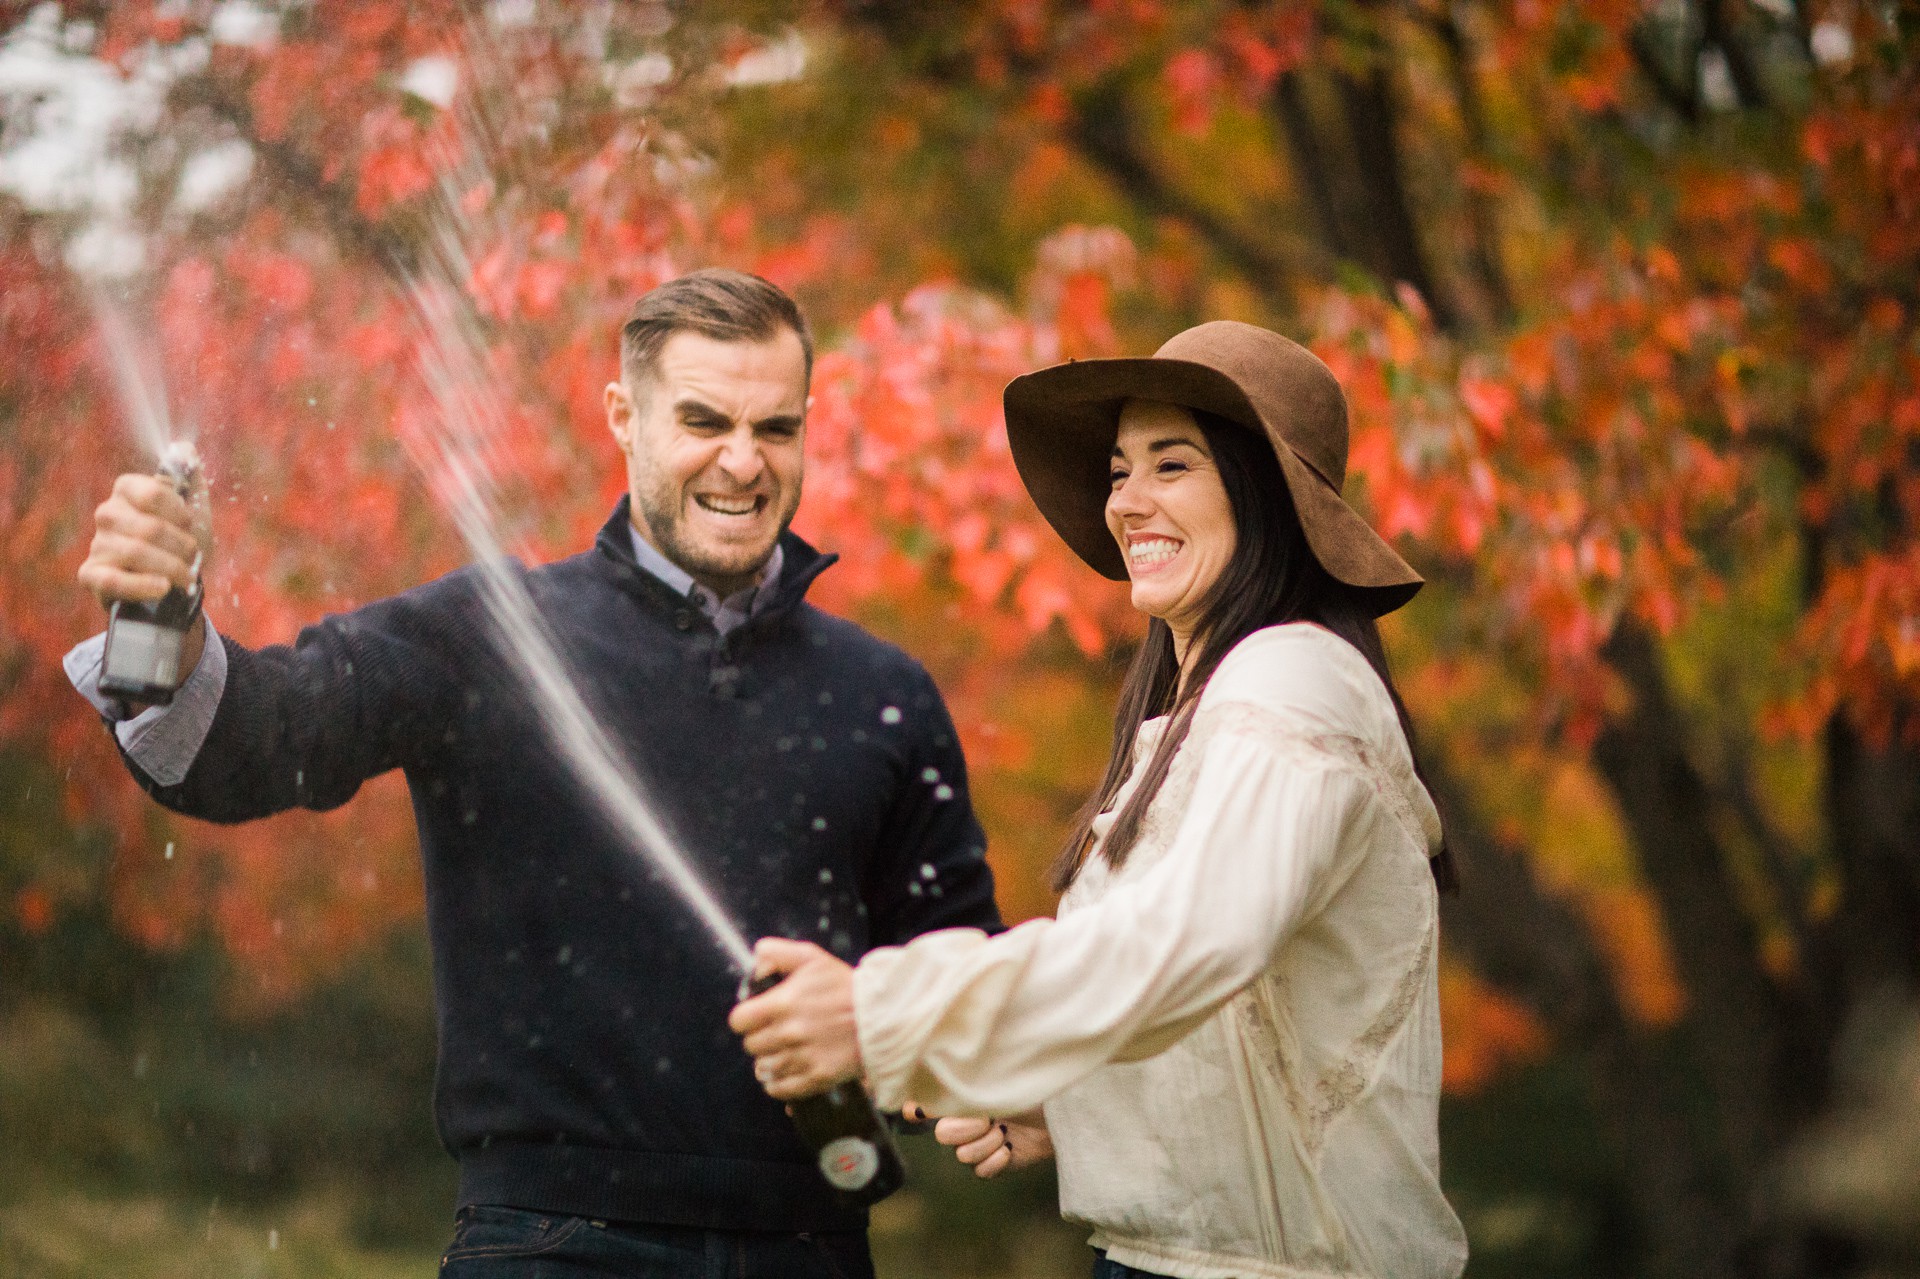 Cleveland Fall Engagement Photos at Patterson Fruit Farm 23.jpg